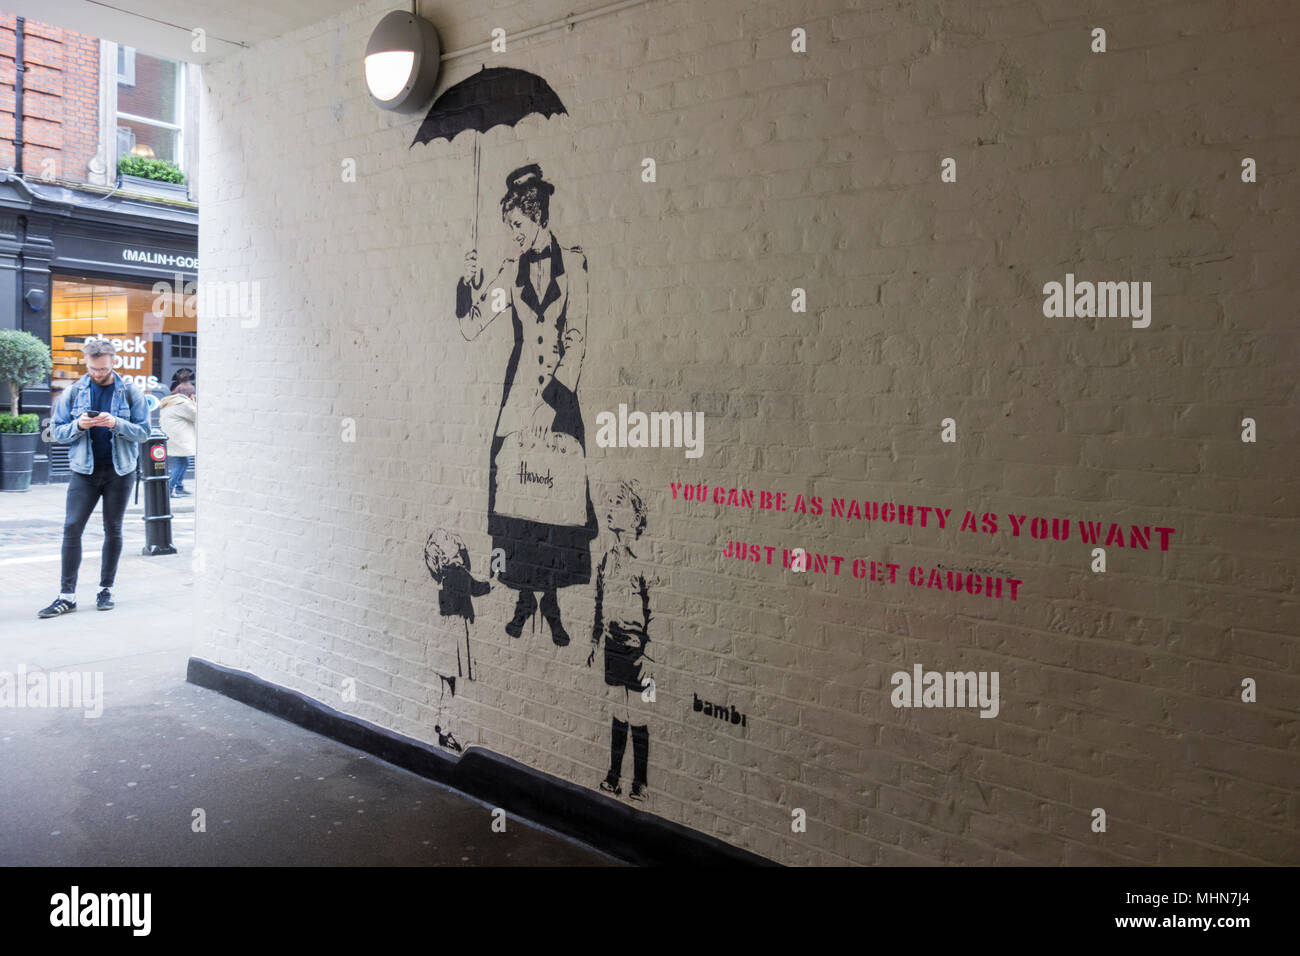 Bambi street art - Lady Di as Mary Poppins in Neal's Yard, Covent Garden, London, UK Stock Photo